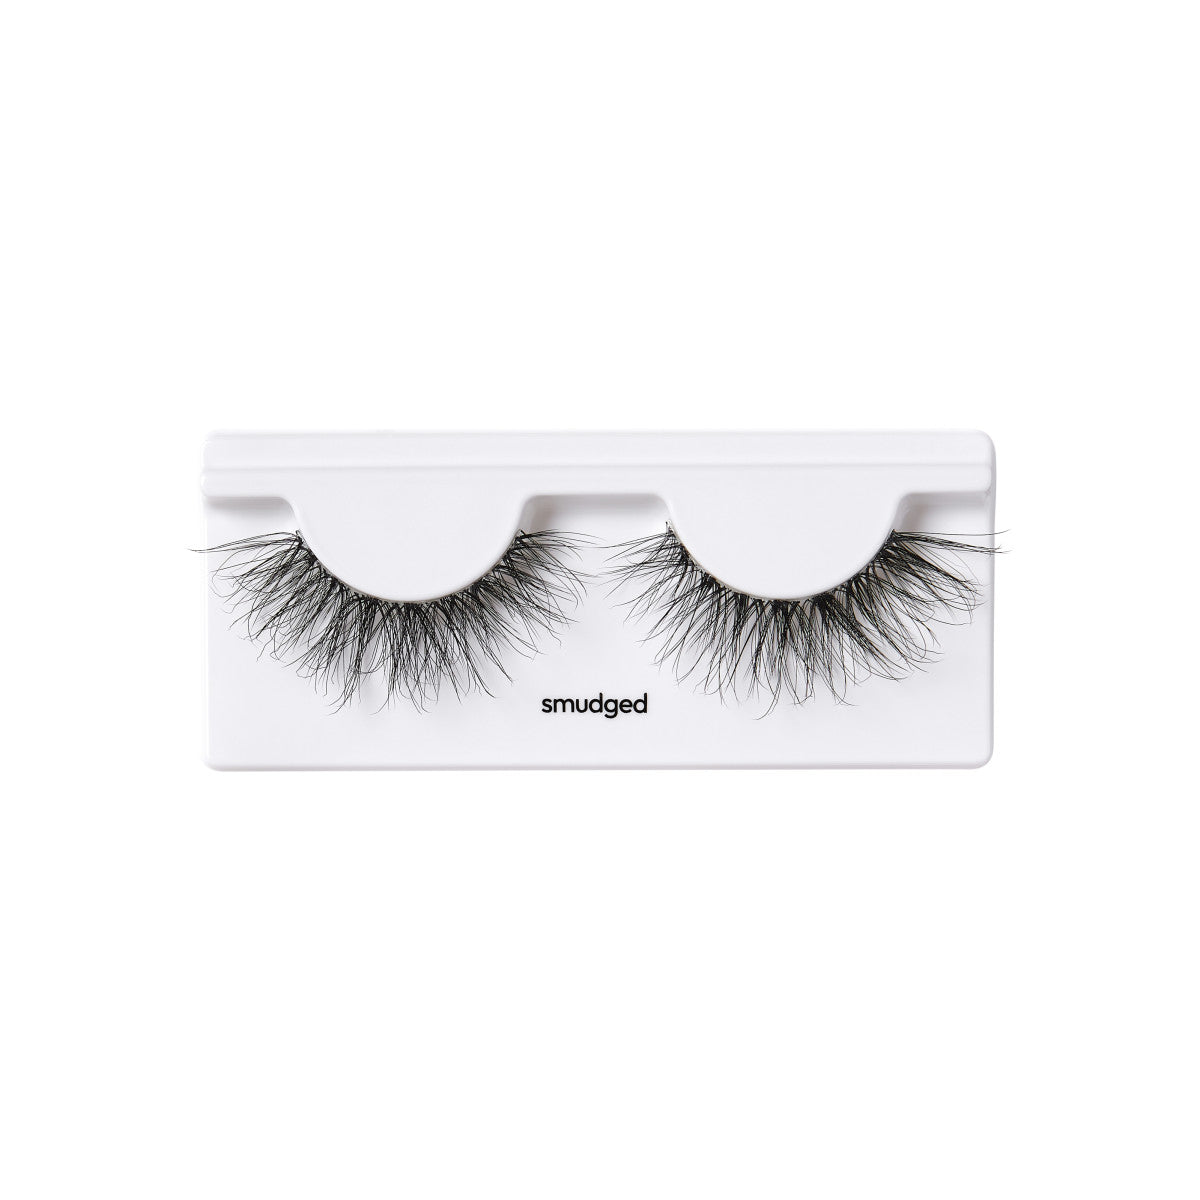 A pair of KISS Rebel Couture false lashes in the style, Smudged shown outside of the packaging